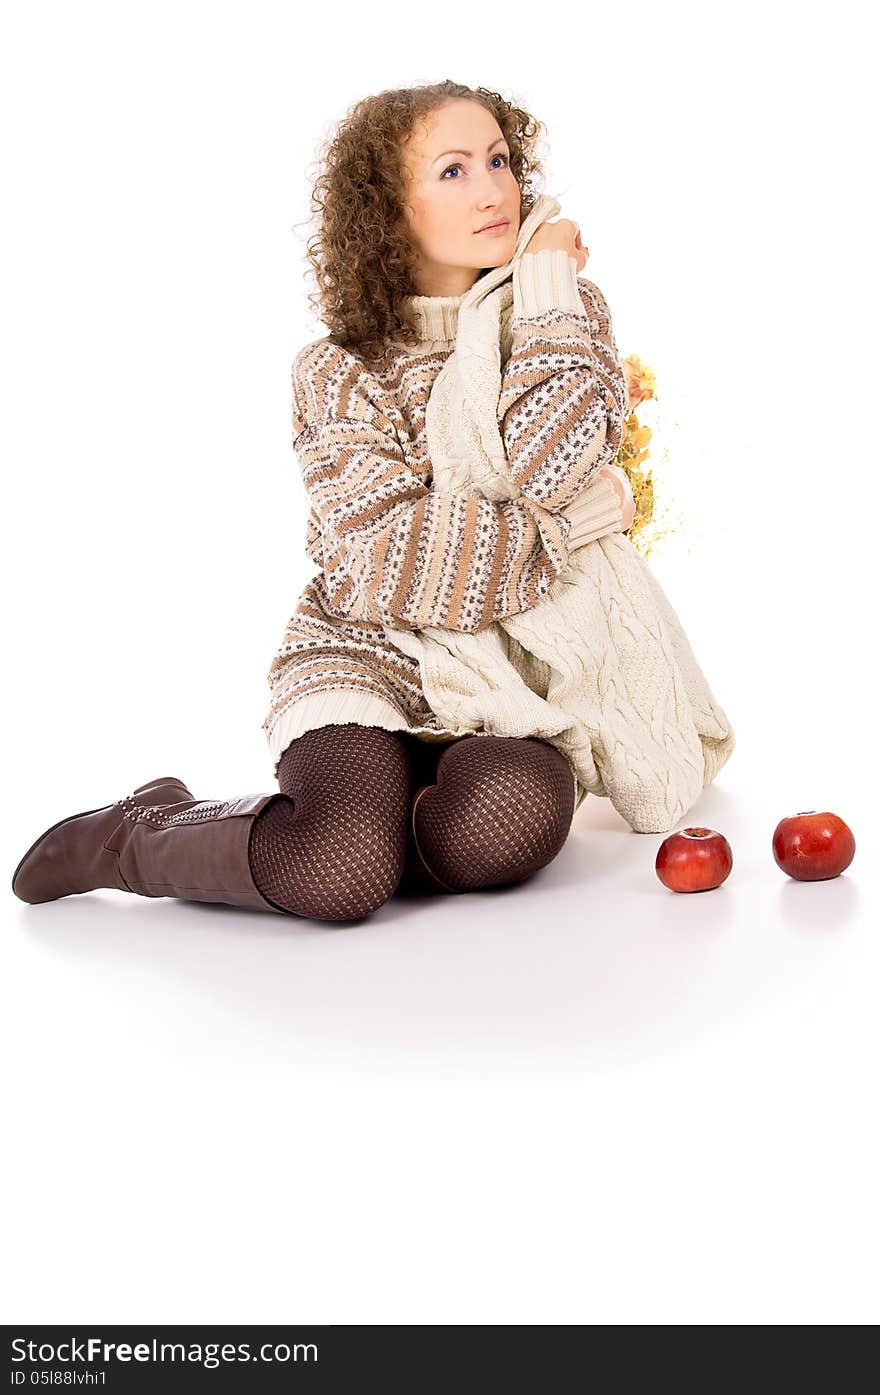 Girl sitting comfortably and is heated with apples